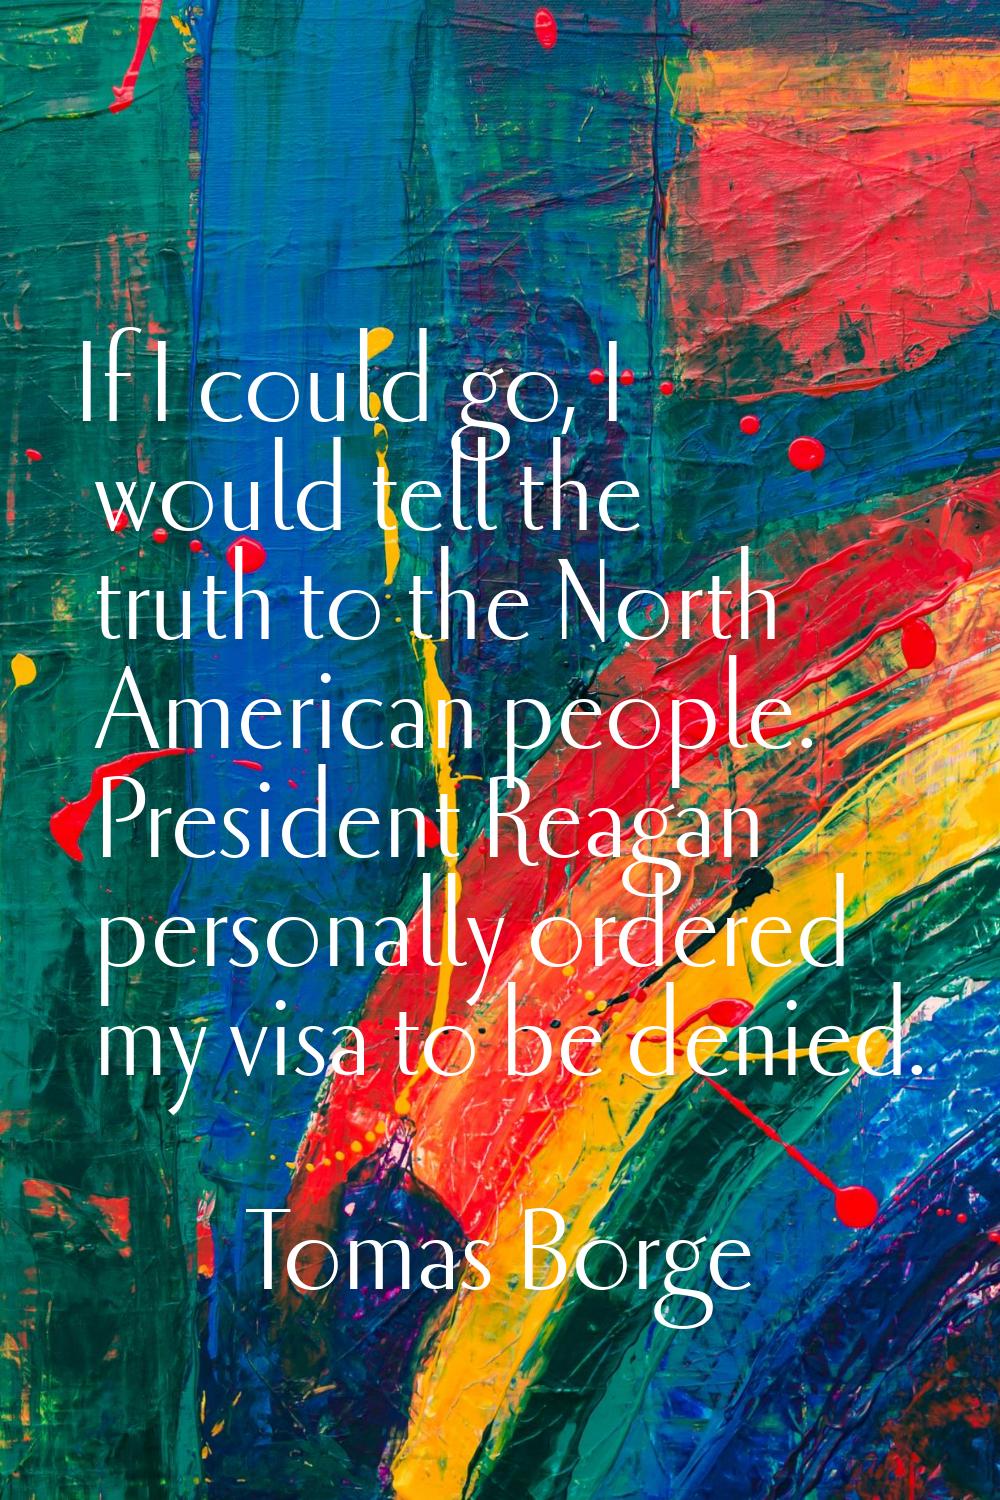 If I could go, I would tell the truth to the North American people. President Reagan personally ord